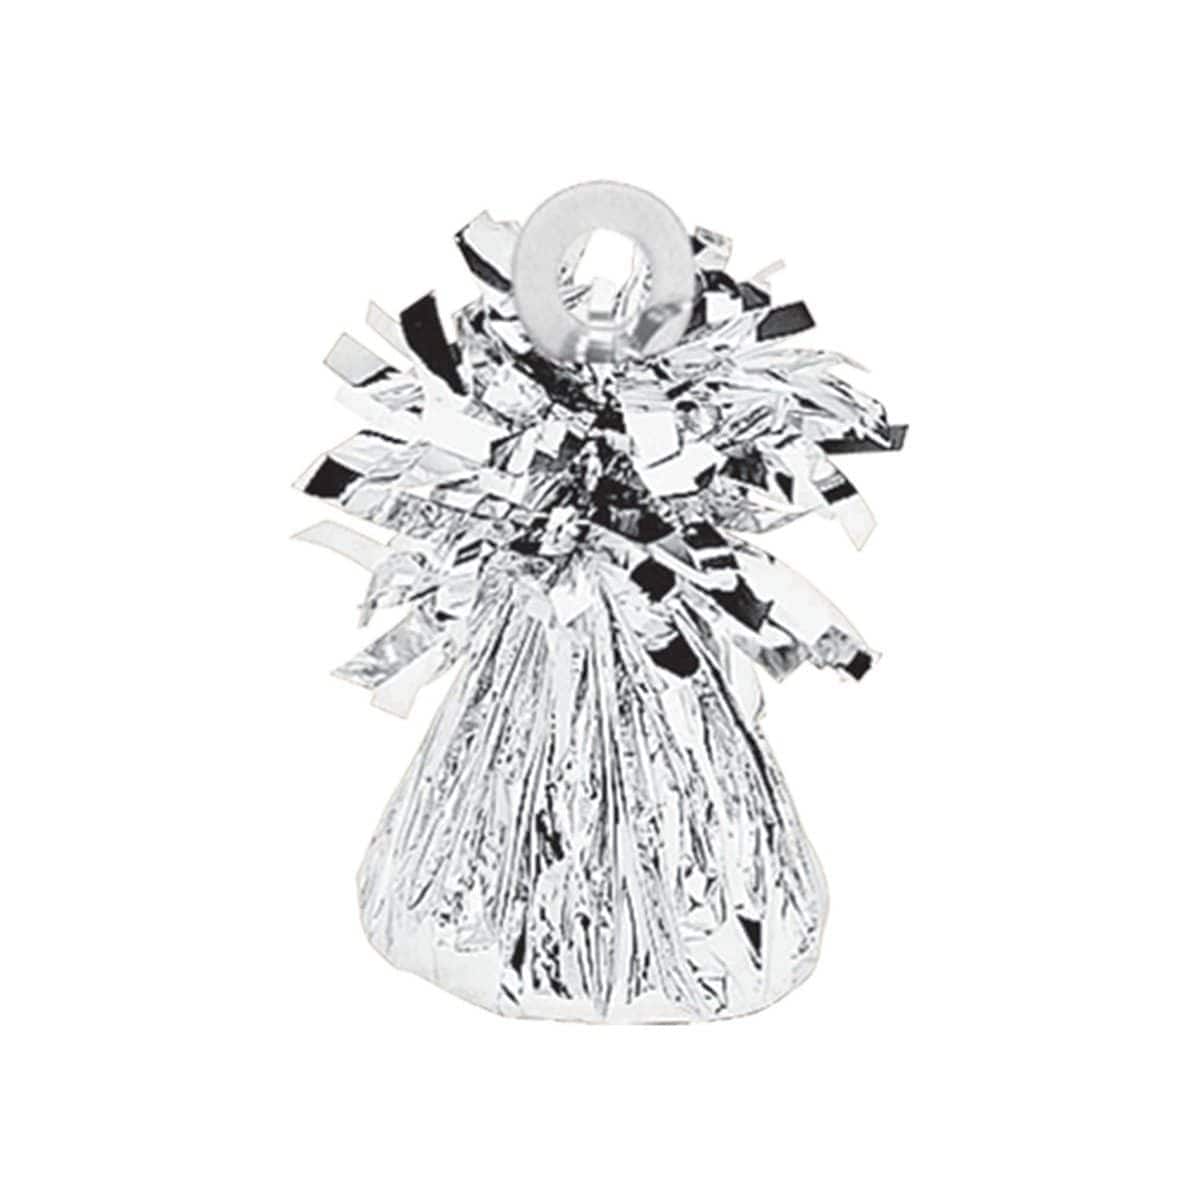 Buy Ballons Foil Balloon Weight - Silver sold at Party Expert